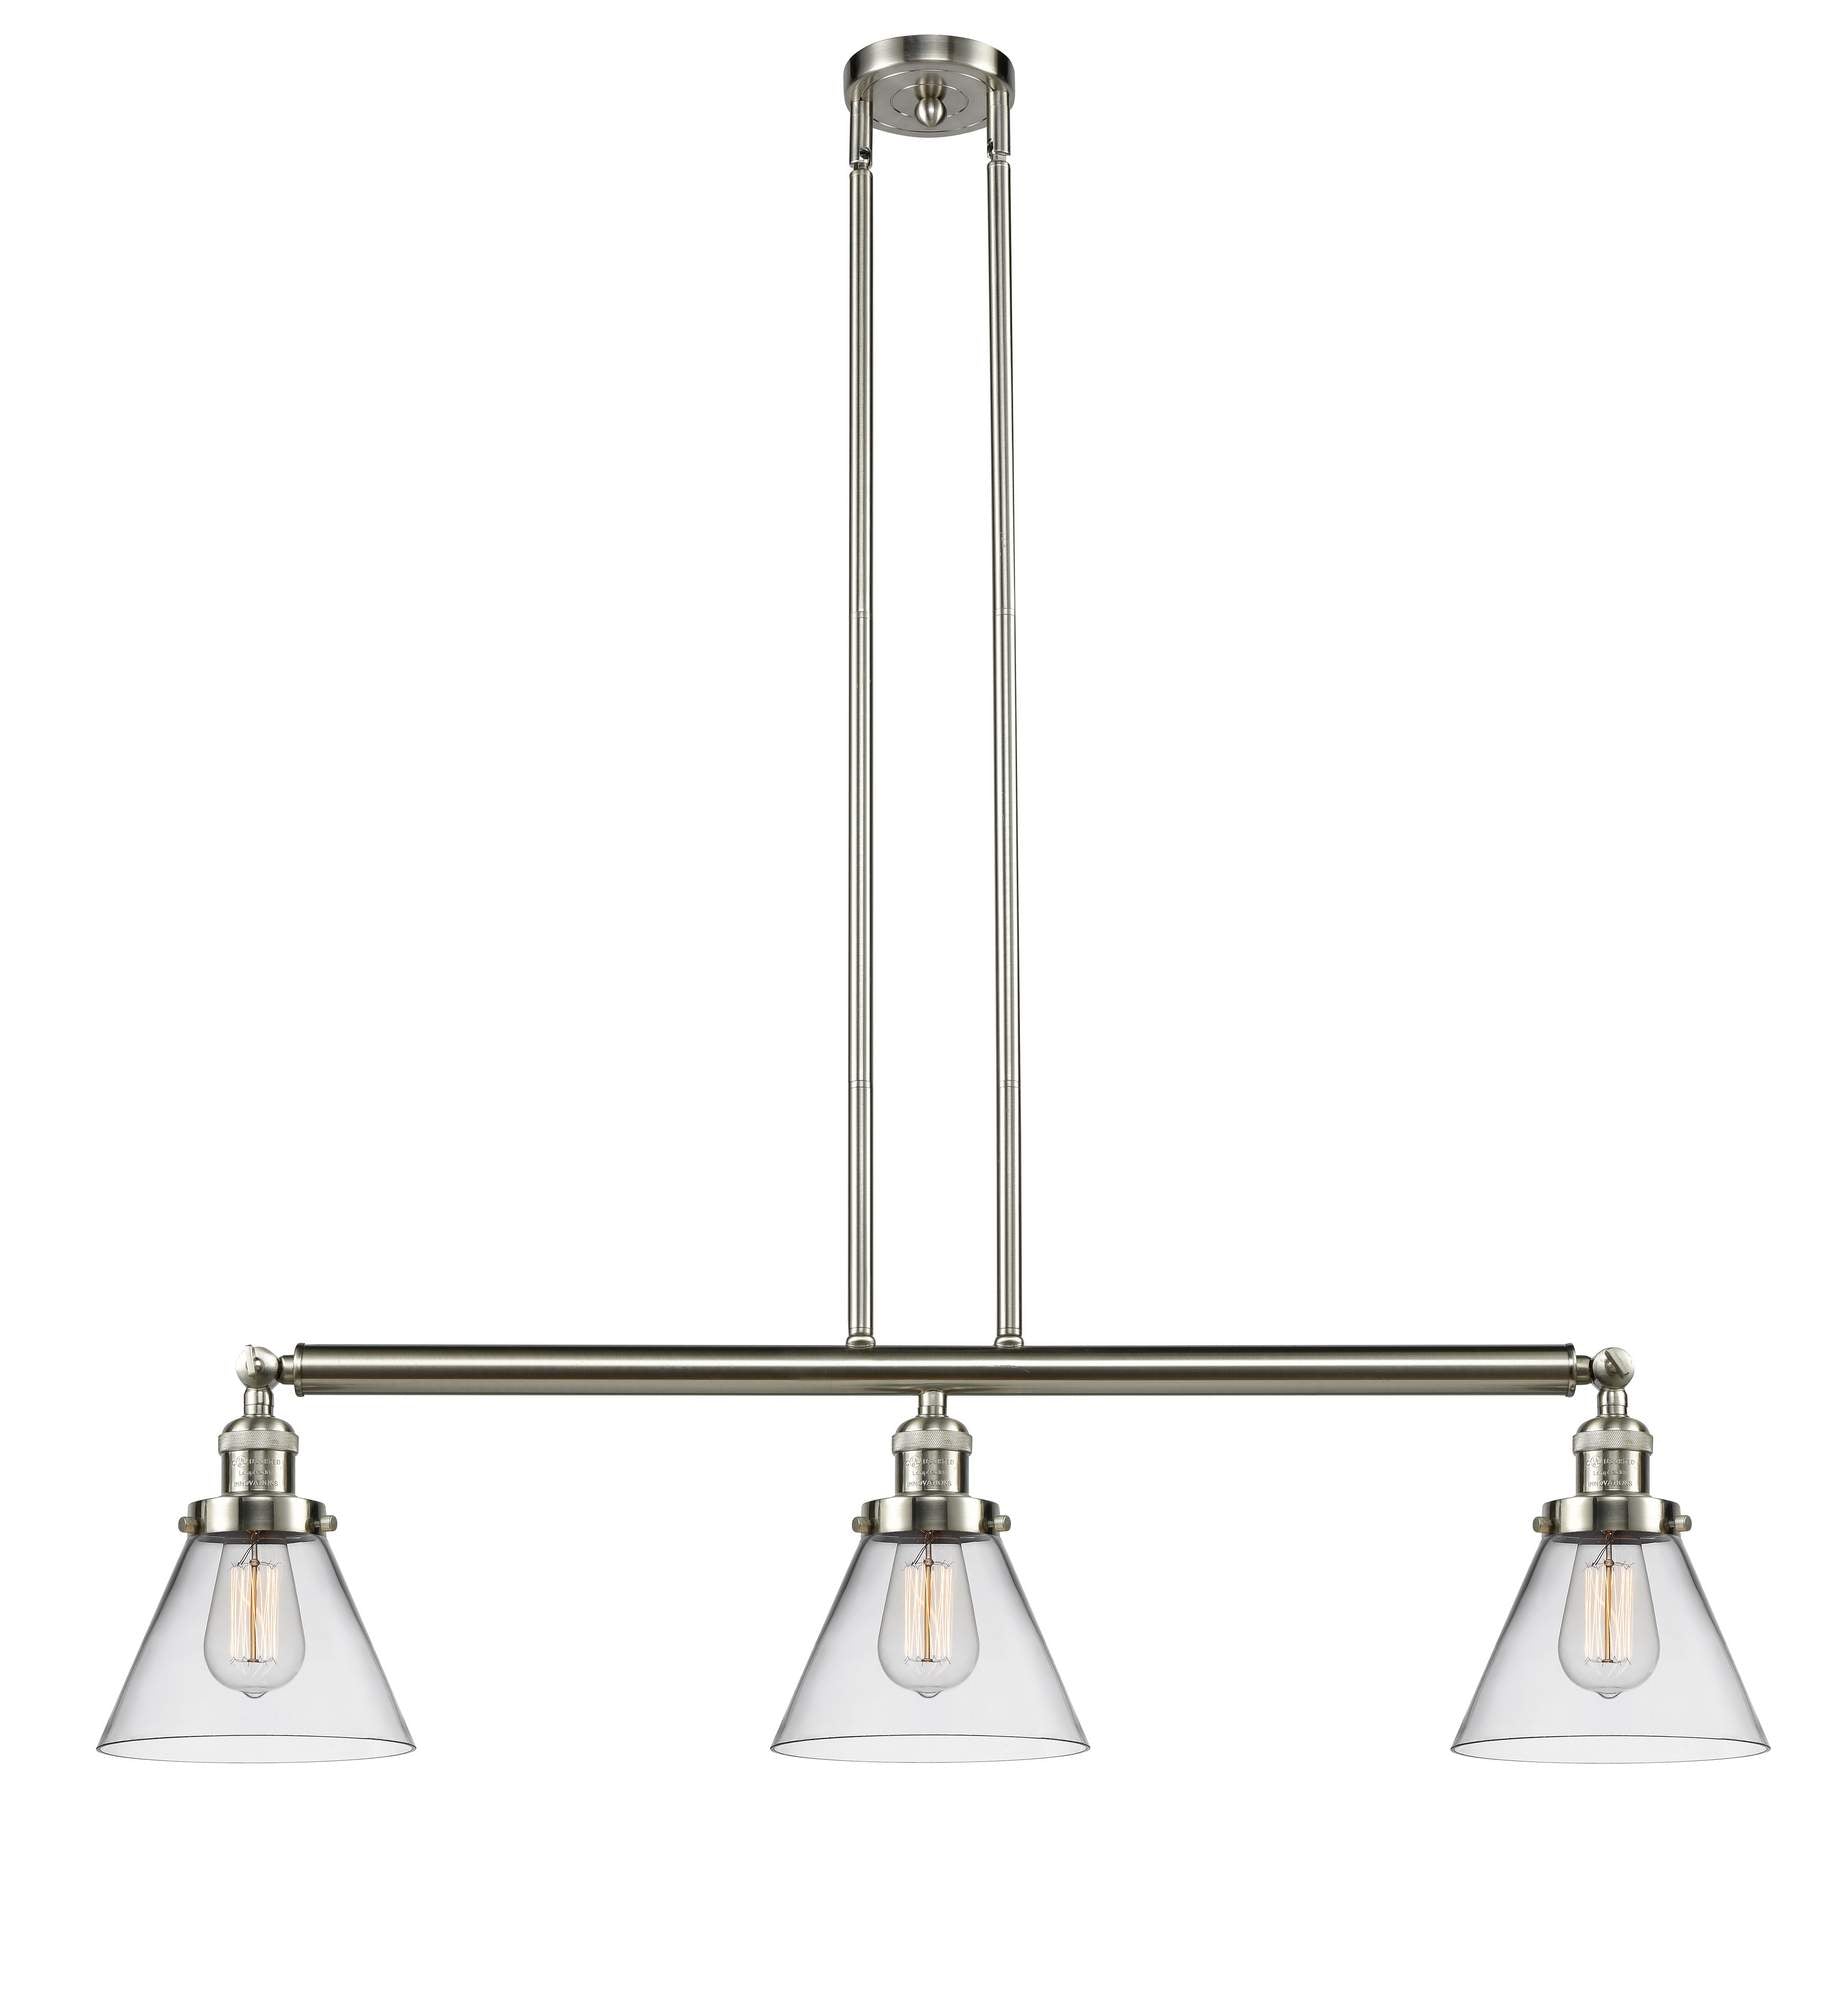 213-SN-G42 3-Light 40.25" Brushed Satin Nickel Island Light - Clear Large Cone Glass - LED Bulb - Dimmensions: 40.25 x 7.75 x 10<br>Minimum Height : 20.25<br>Maximum Height : 44.25 - Sloped Ceiling Compatible: Yes